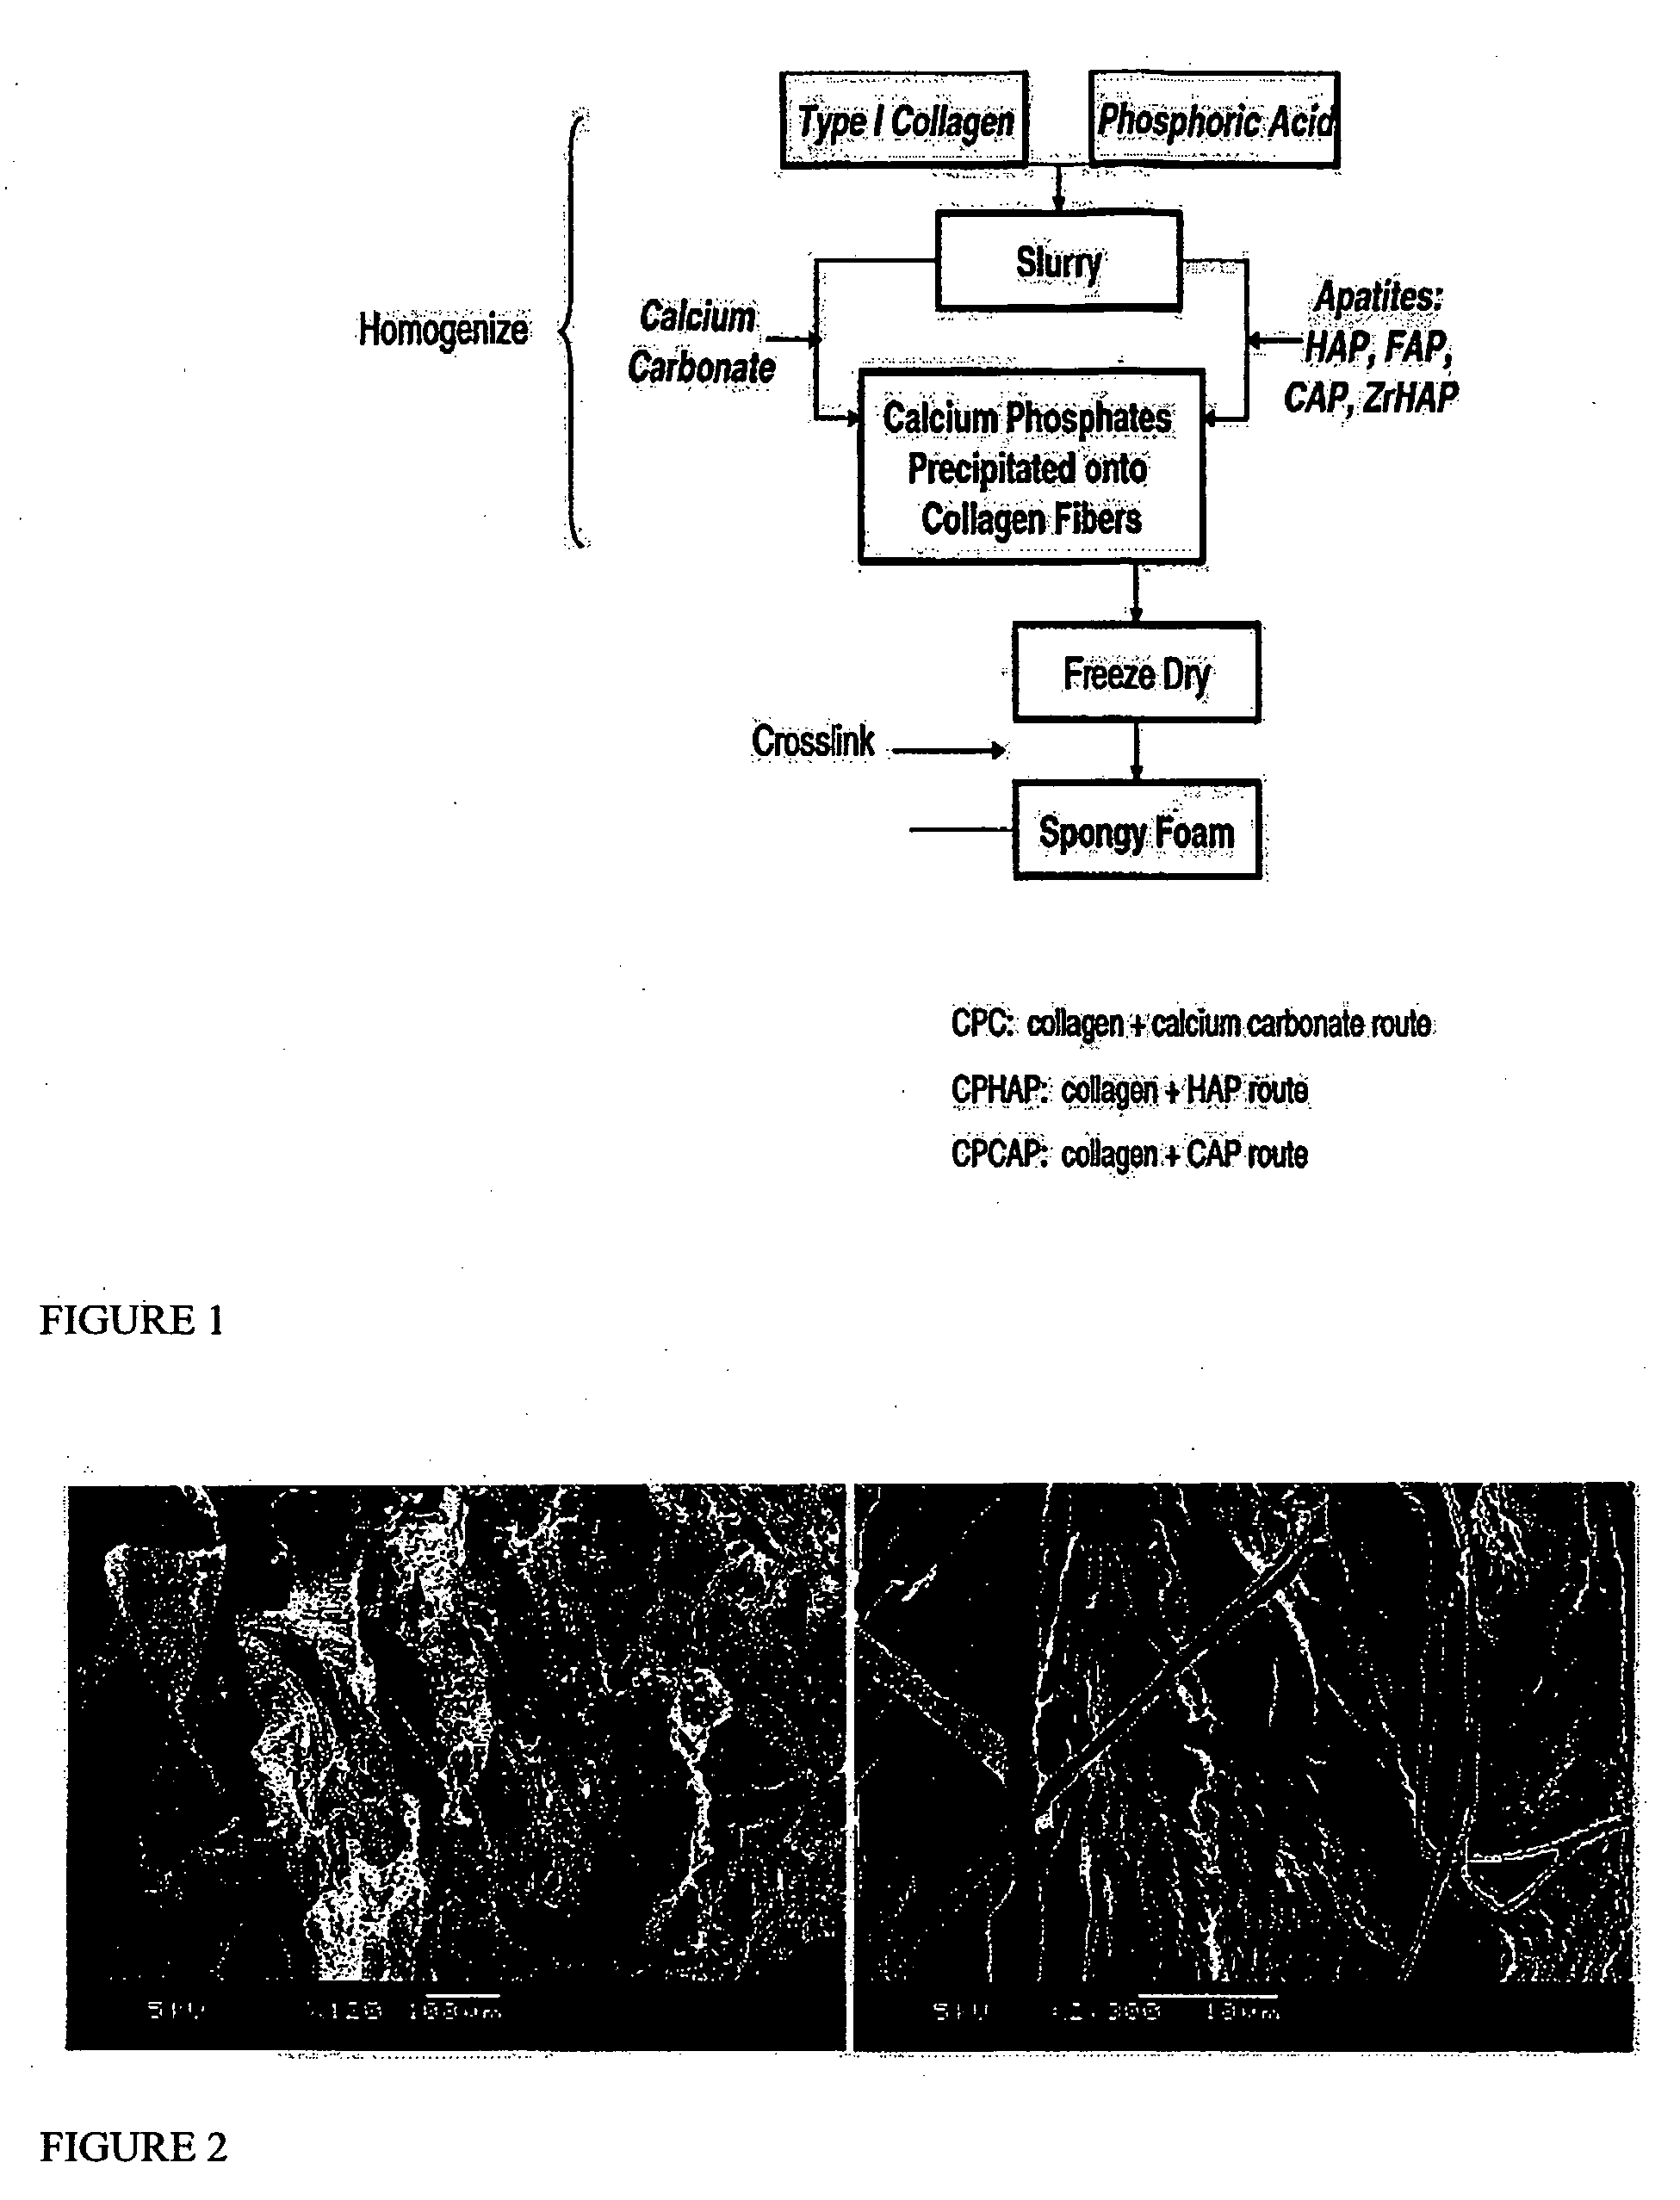 Porous biomaterial-filler composite and method for making the same